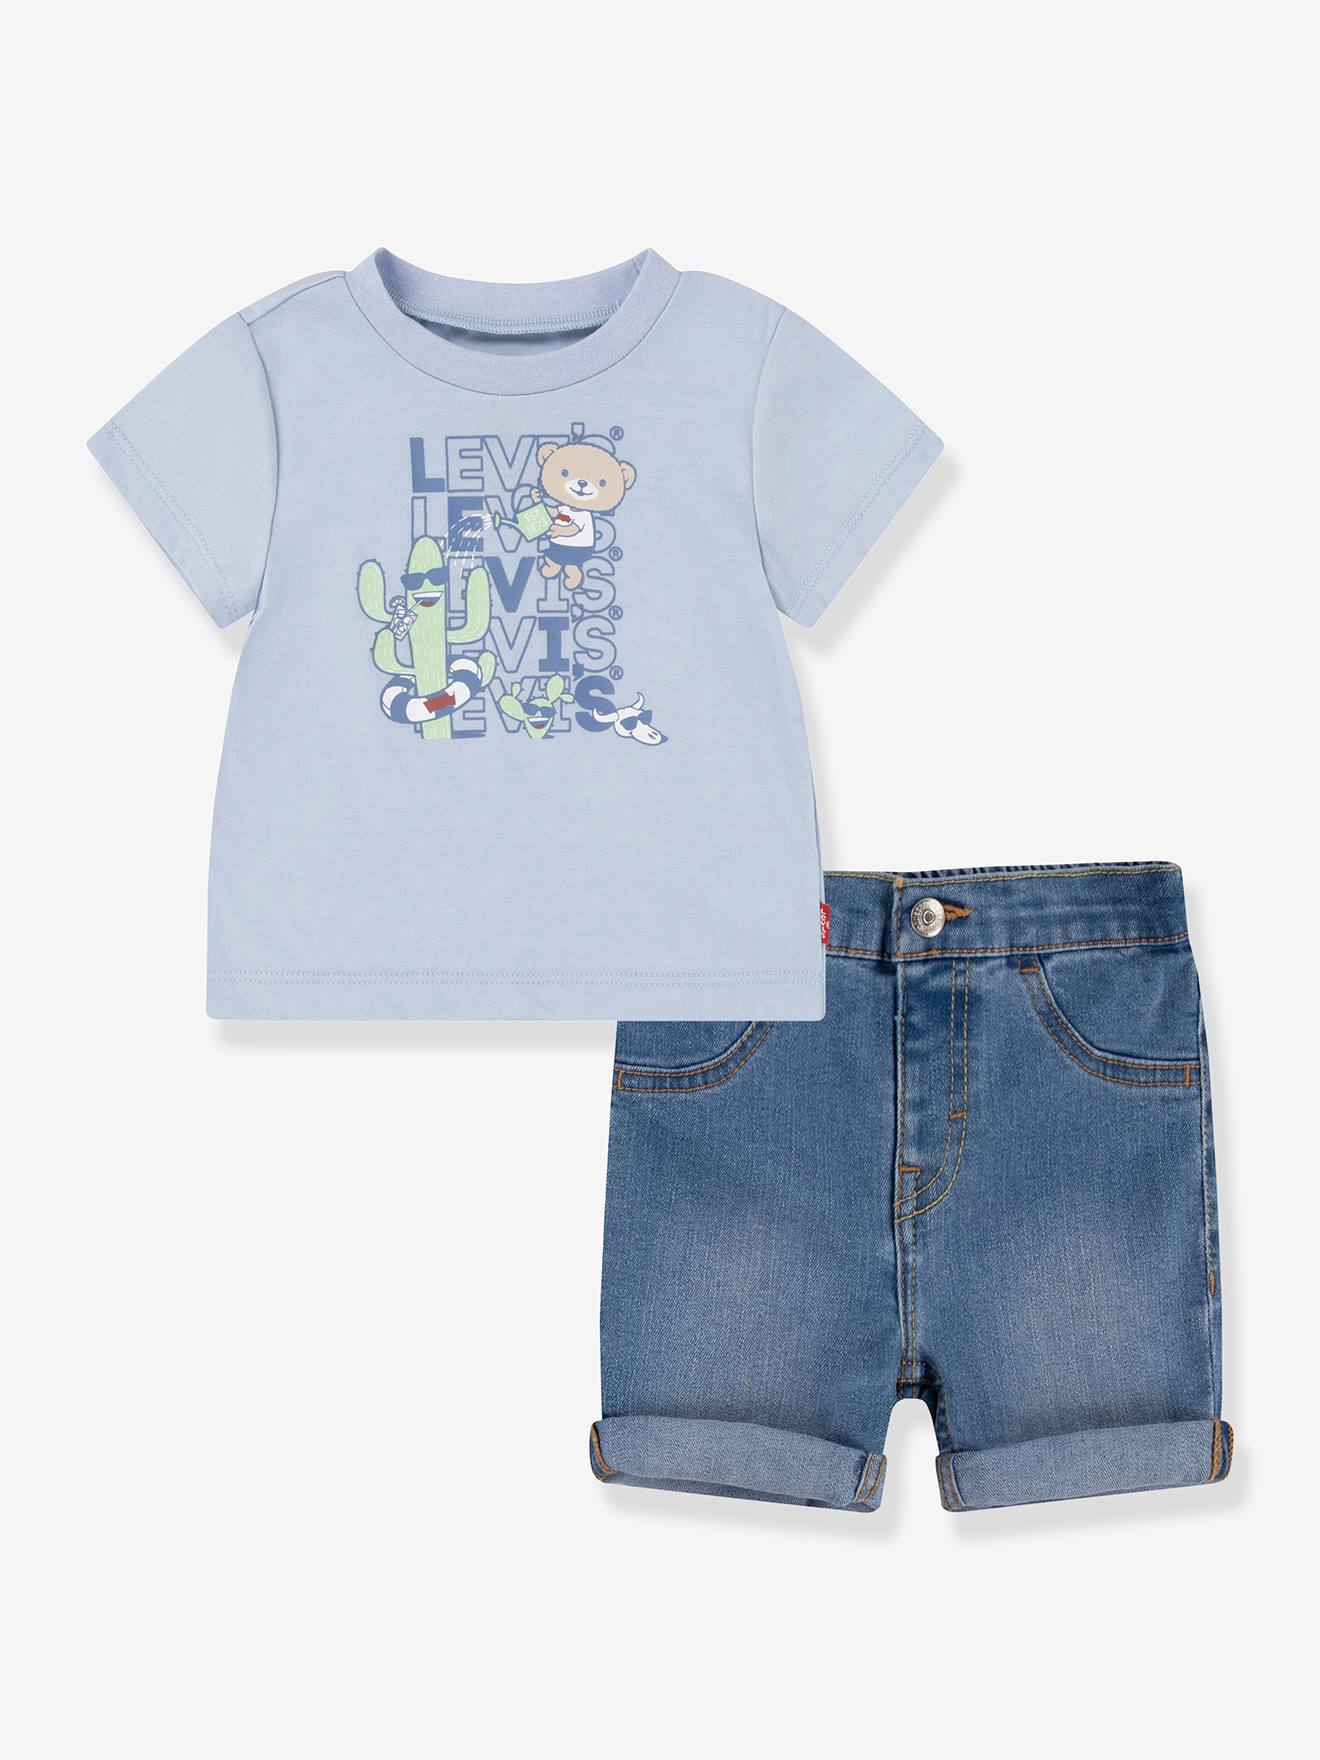 Shorts + T-Shirt Combo by Levi’s(r) for Boys sky blue